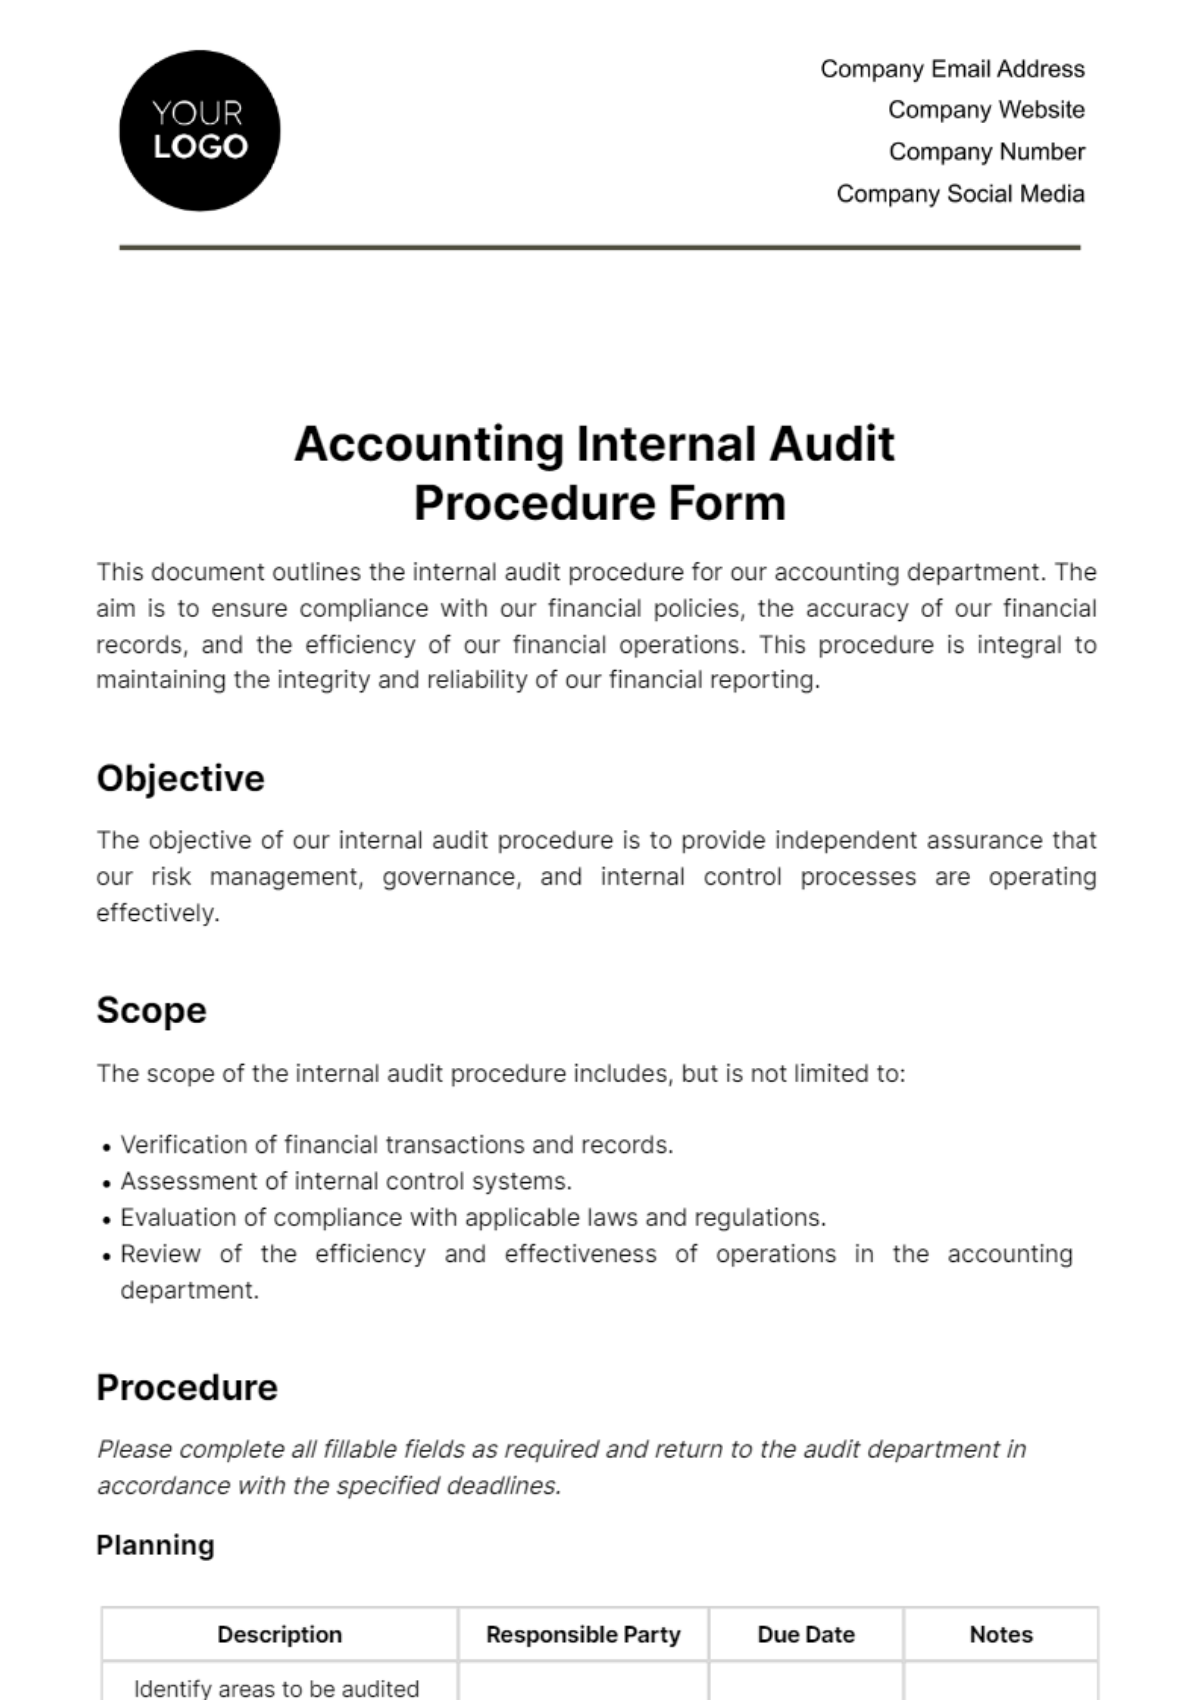 Accounting Internal Audit Procedure Form Template